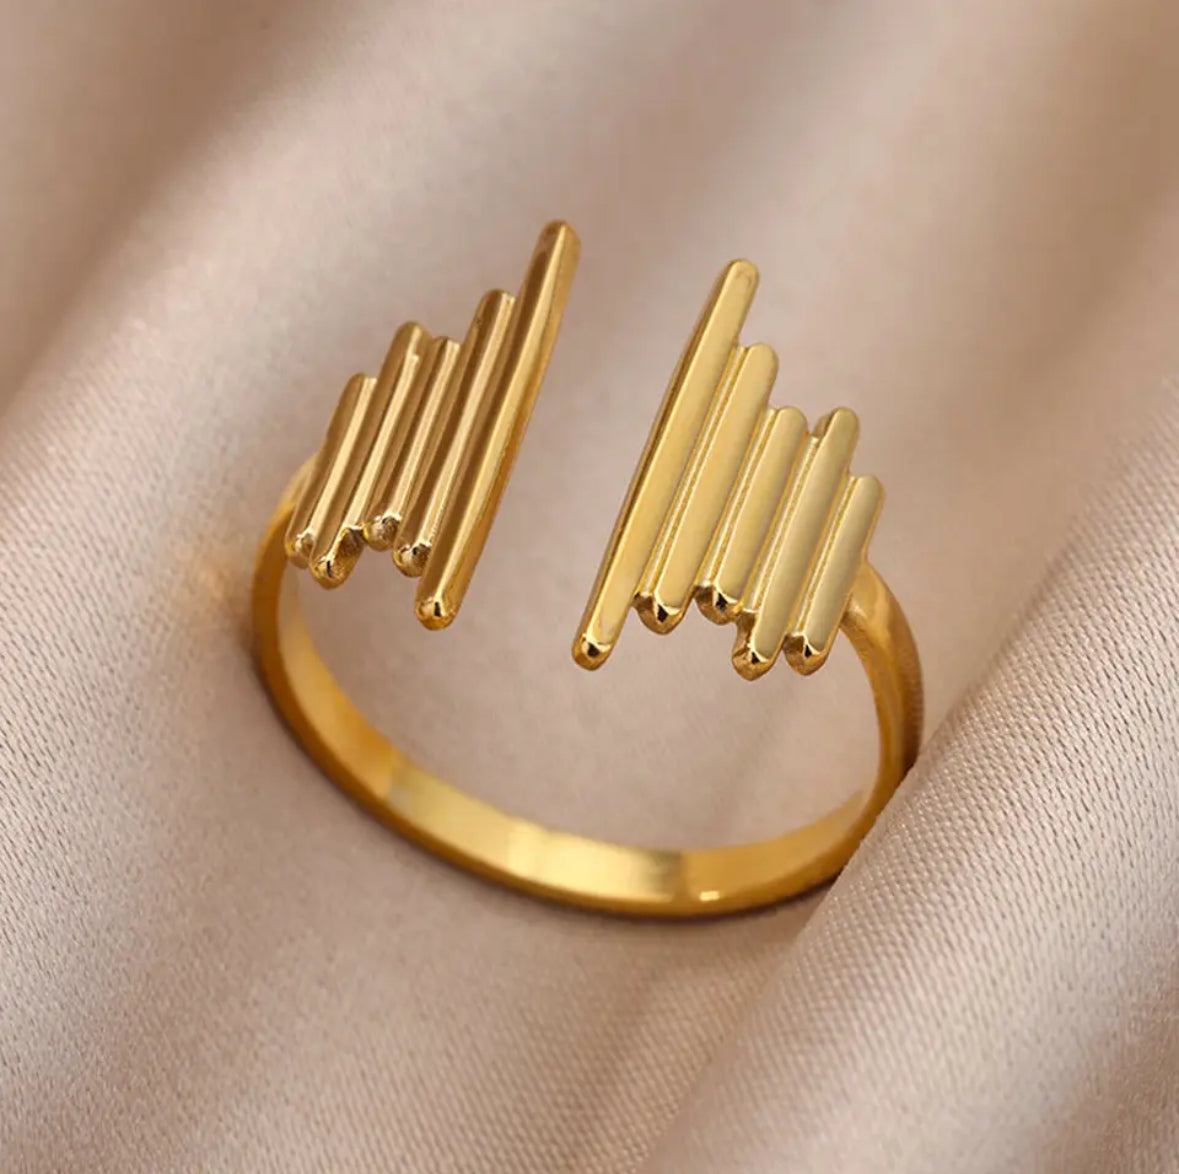 Adjustable Ring, made of 316L Stainless Steel in Gold